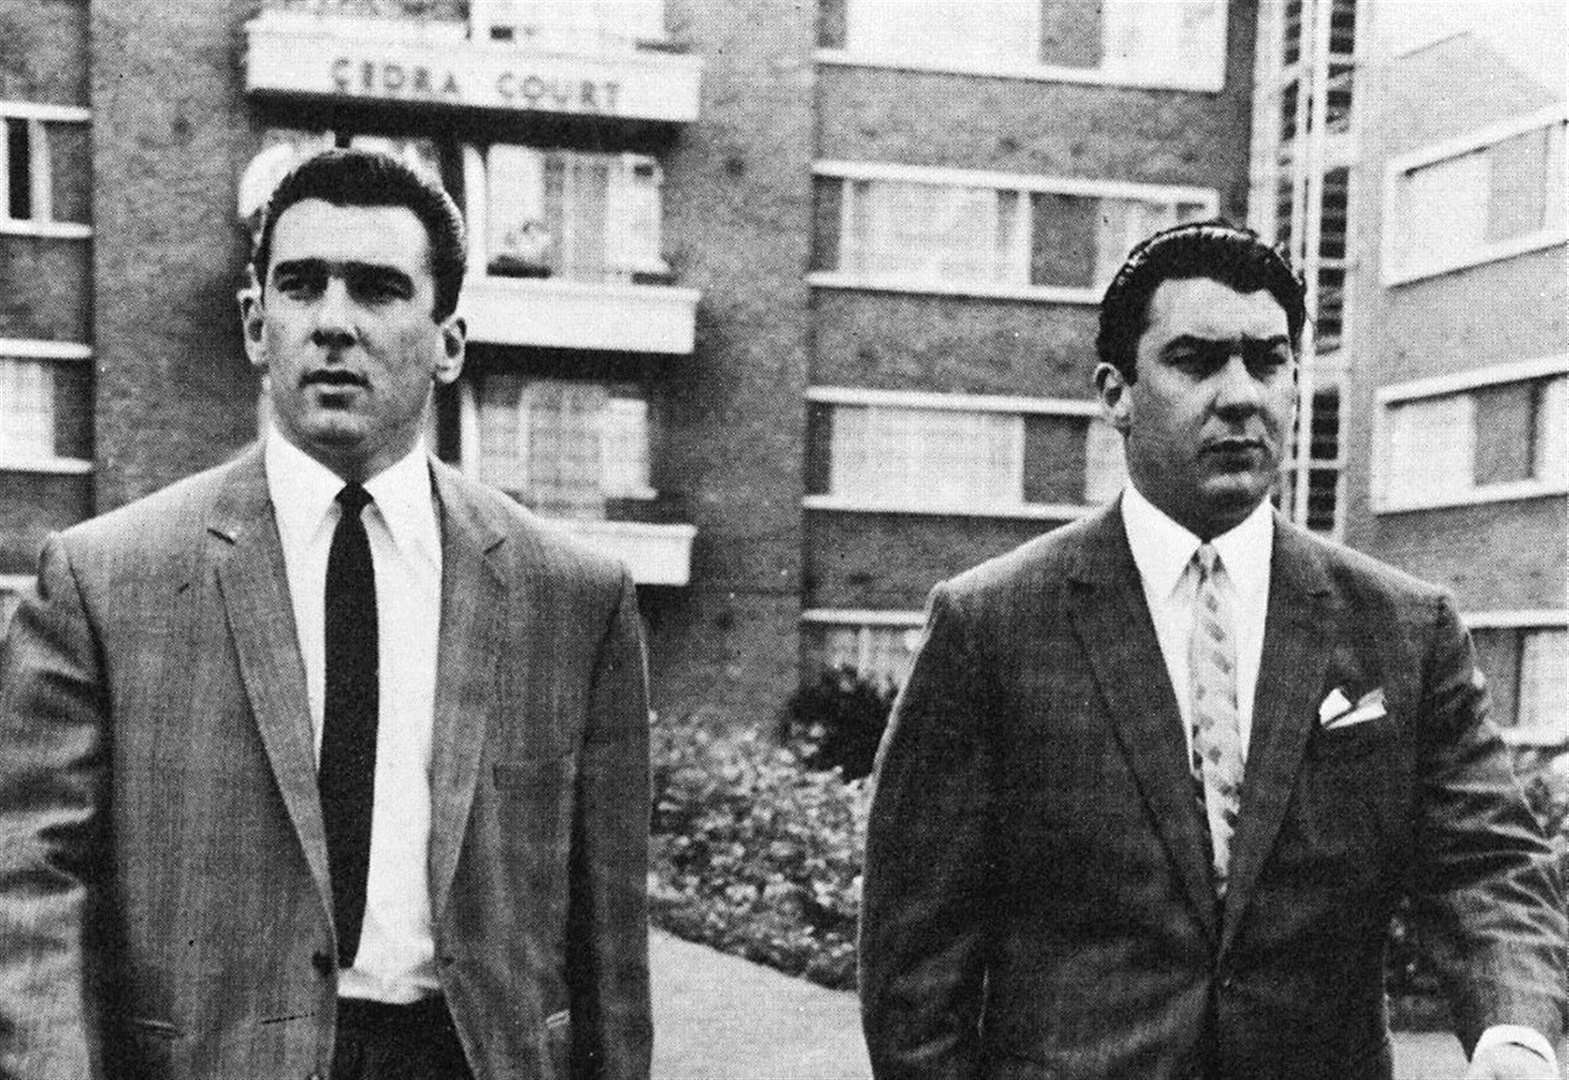 The Kray twins Meet Britain's most notorious gangsters from the 1960s